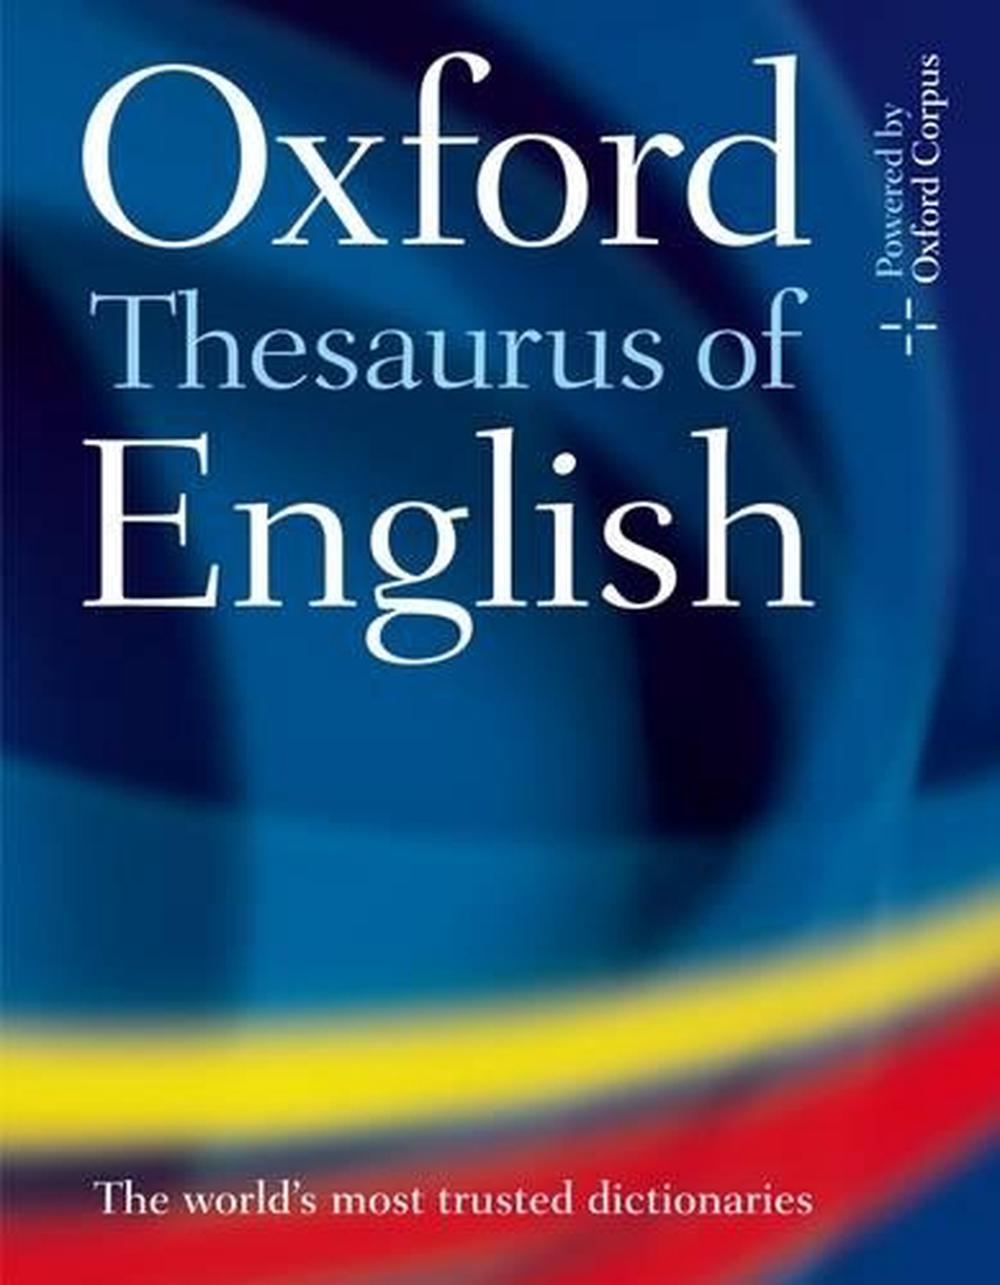 online　of　The　Buy　at　9780199560813　Hardcover,　by　Languages,　Oxford　English　Thesaurus　Oxford　Nile